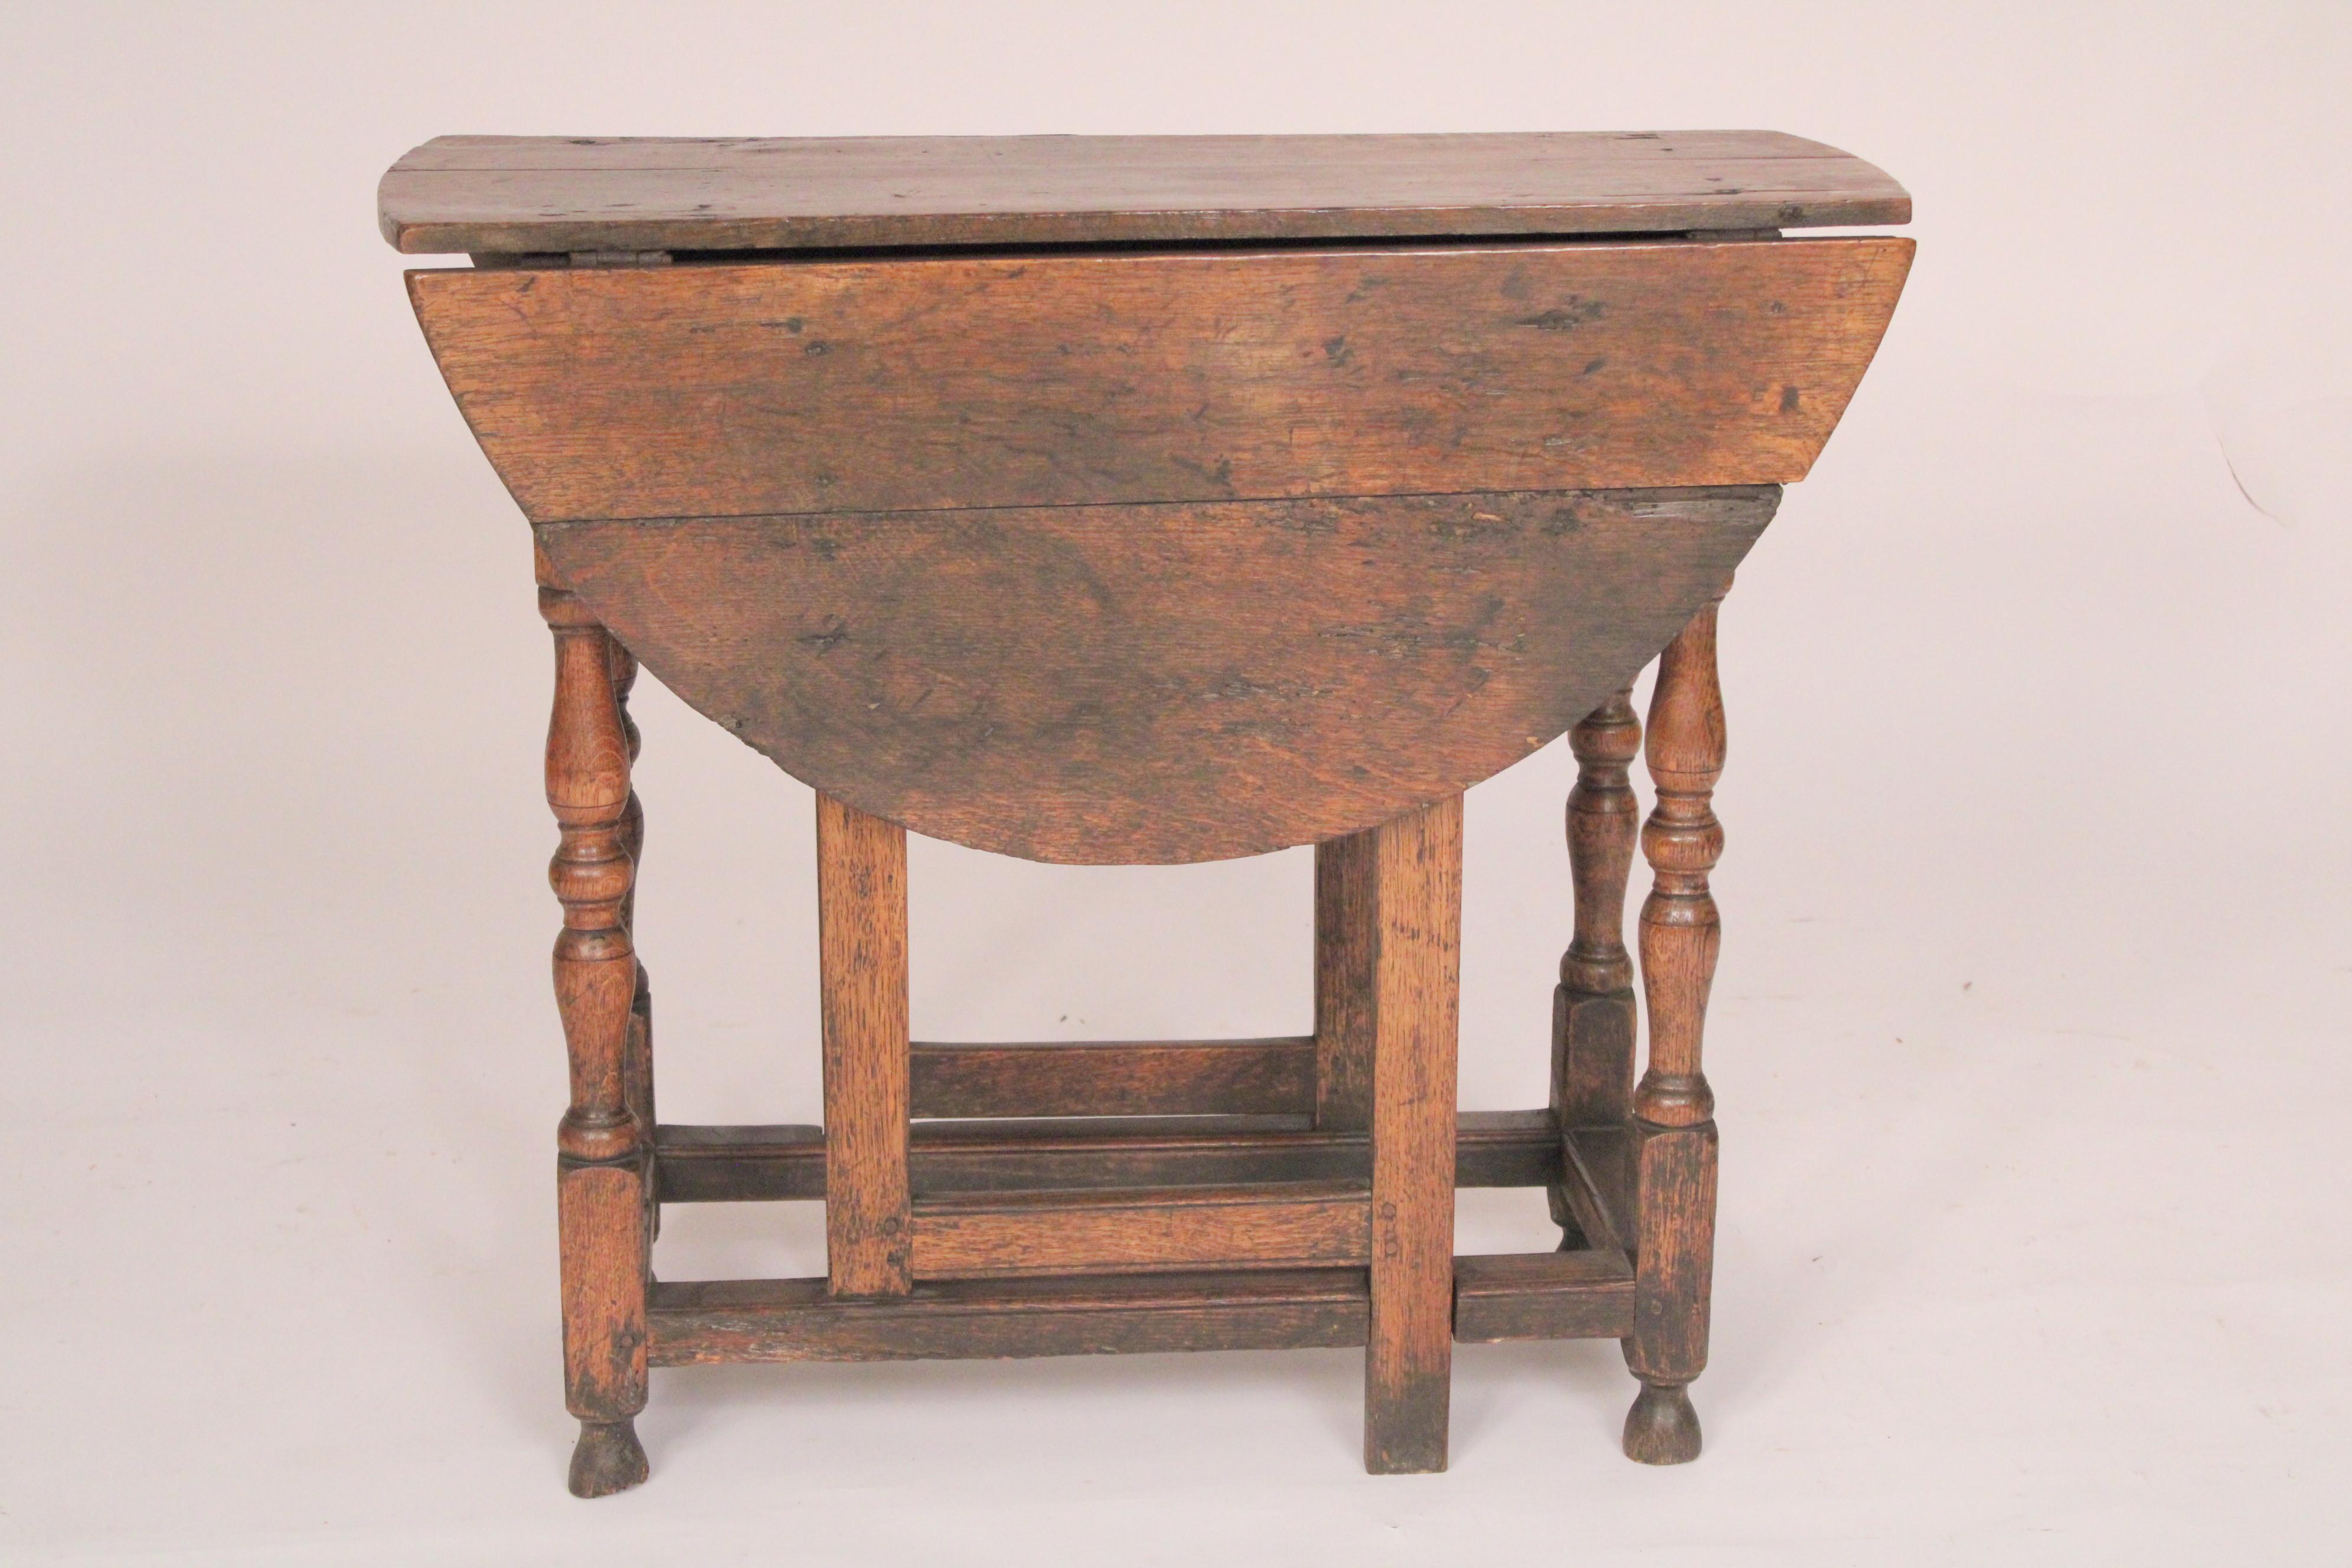 William and Mary style oak gateleg table, 18th century. With two D shaped quarter sawn oak drop leaves and a quarter sawn oak top, one frieze drawer, turned legs with stretcher bars resting on turned feet. Dimensions of top when drop leaves are